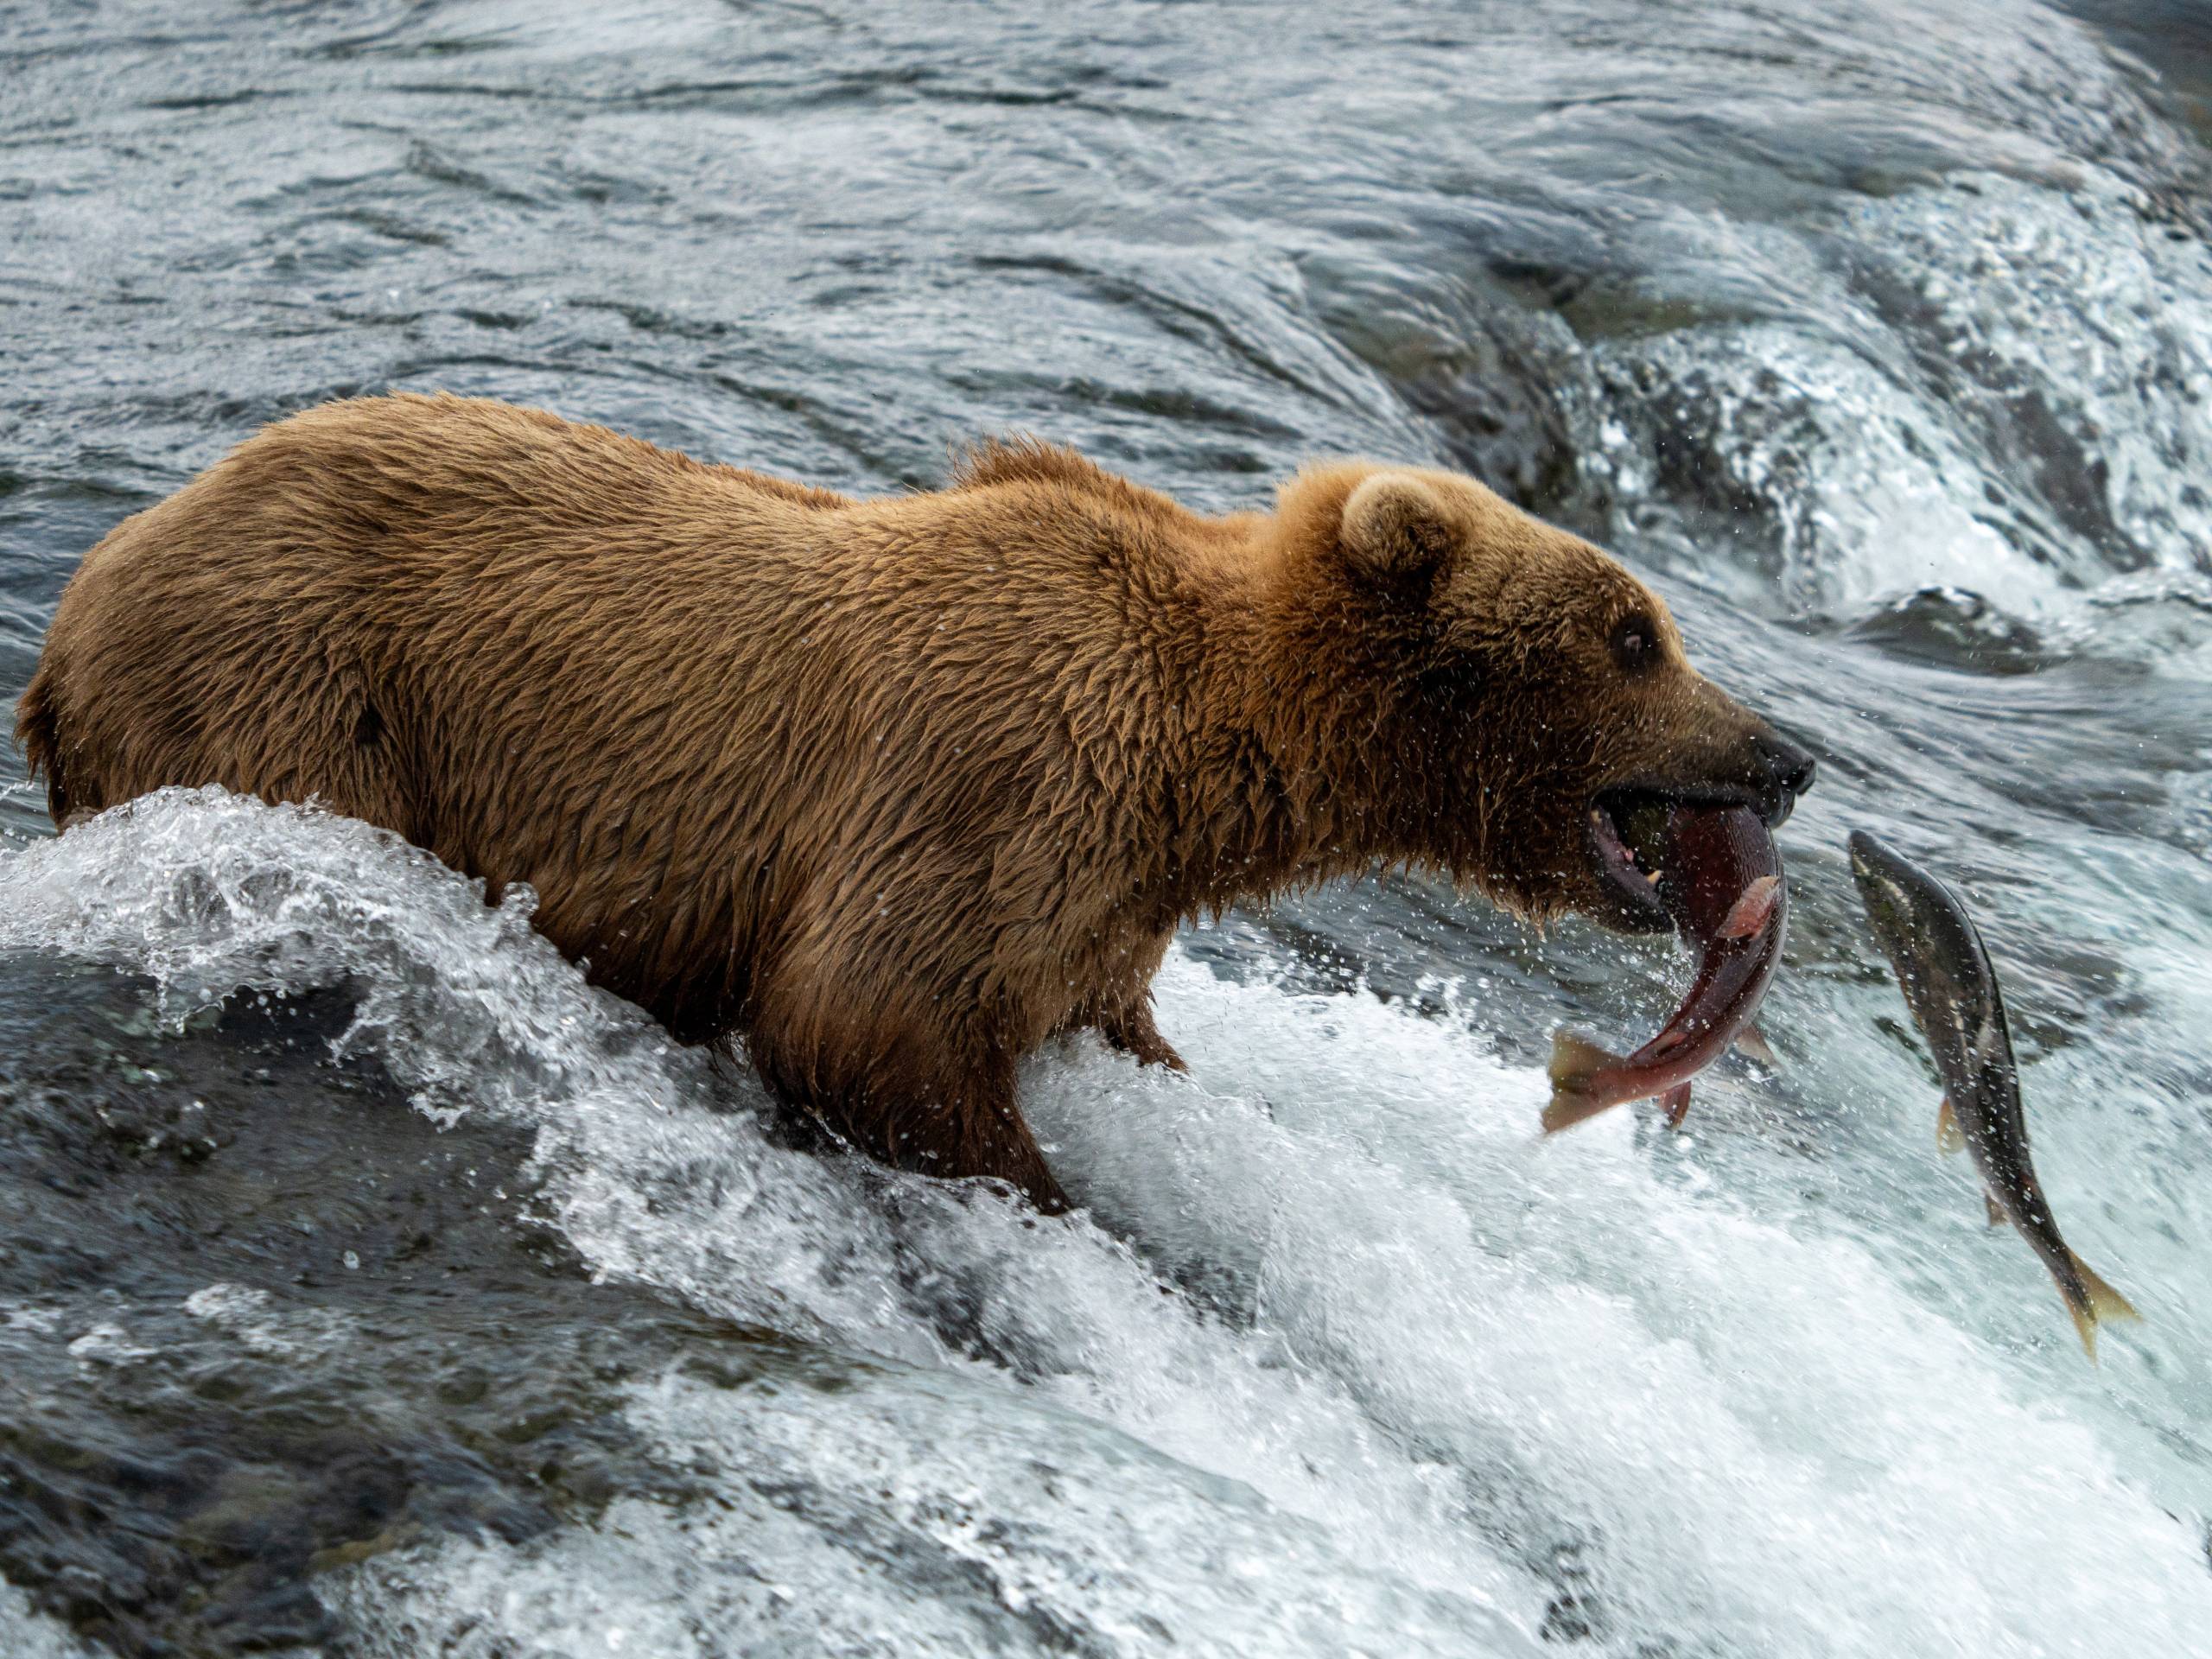 A bear catches a fish in the river.